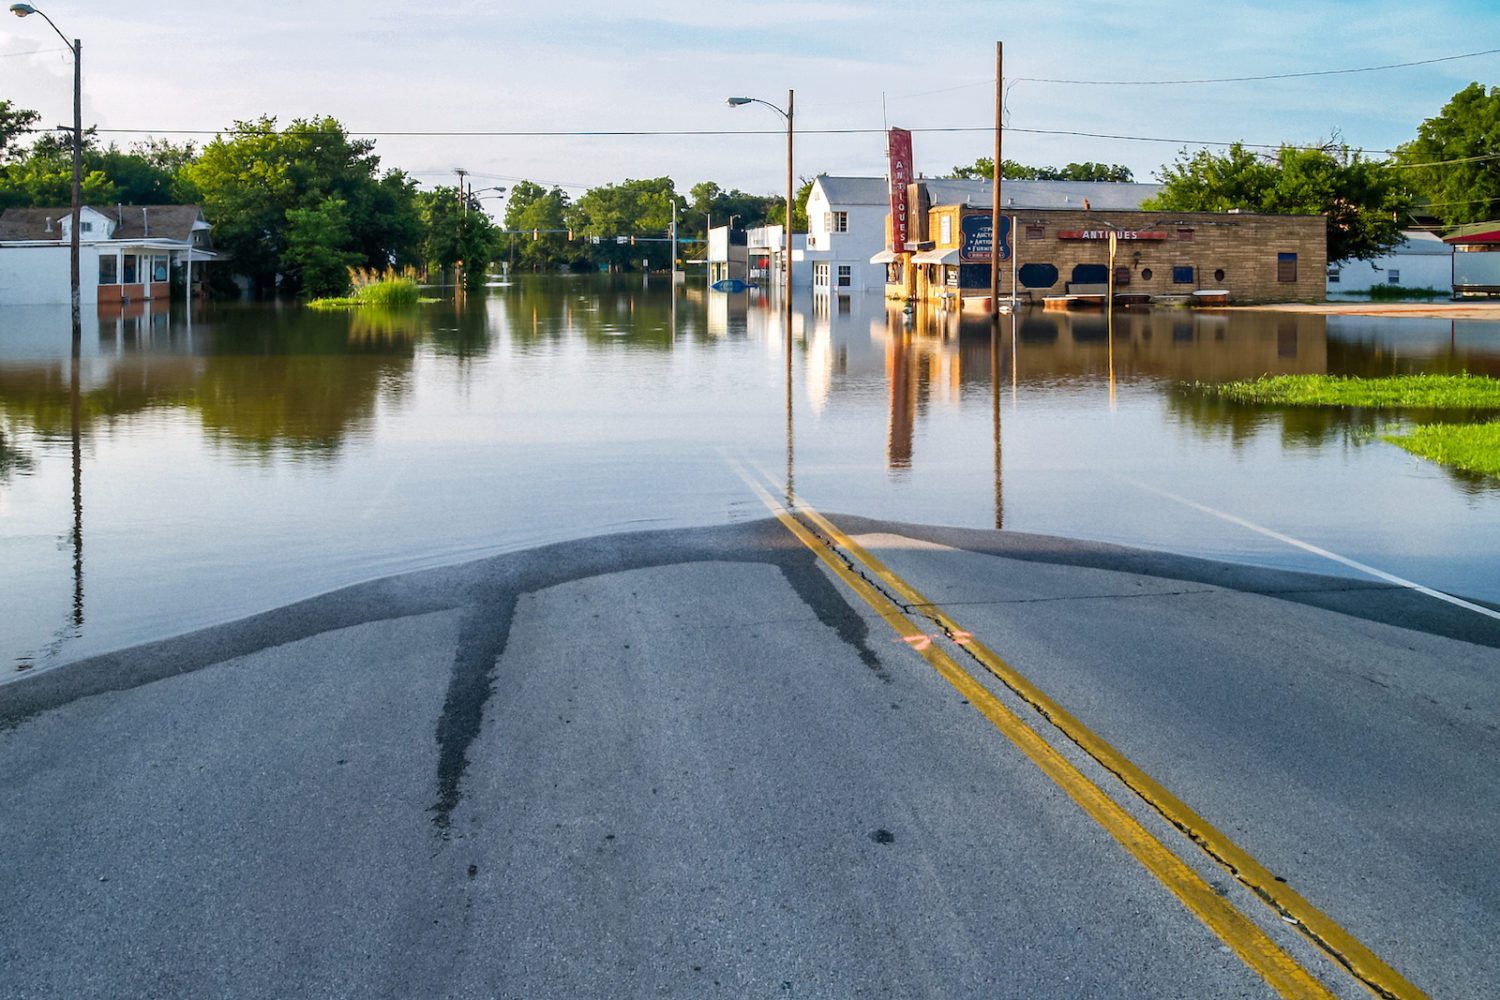 Where To Buy Flood Insurance In Canada - ALIGNED Insurance Brokers